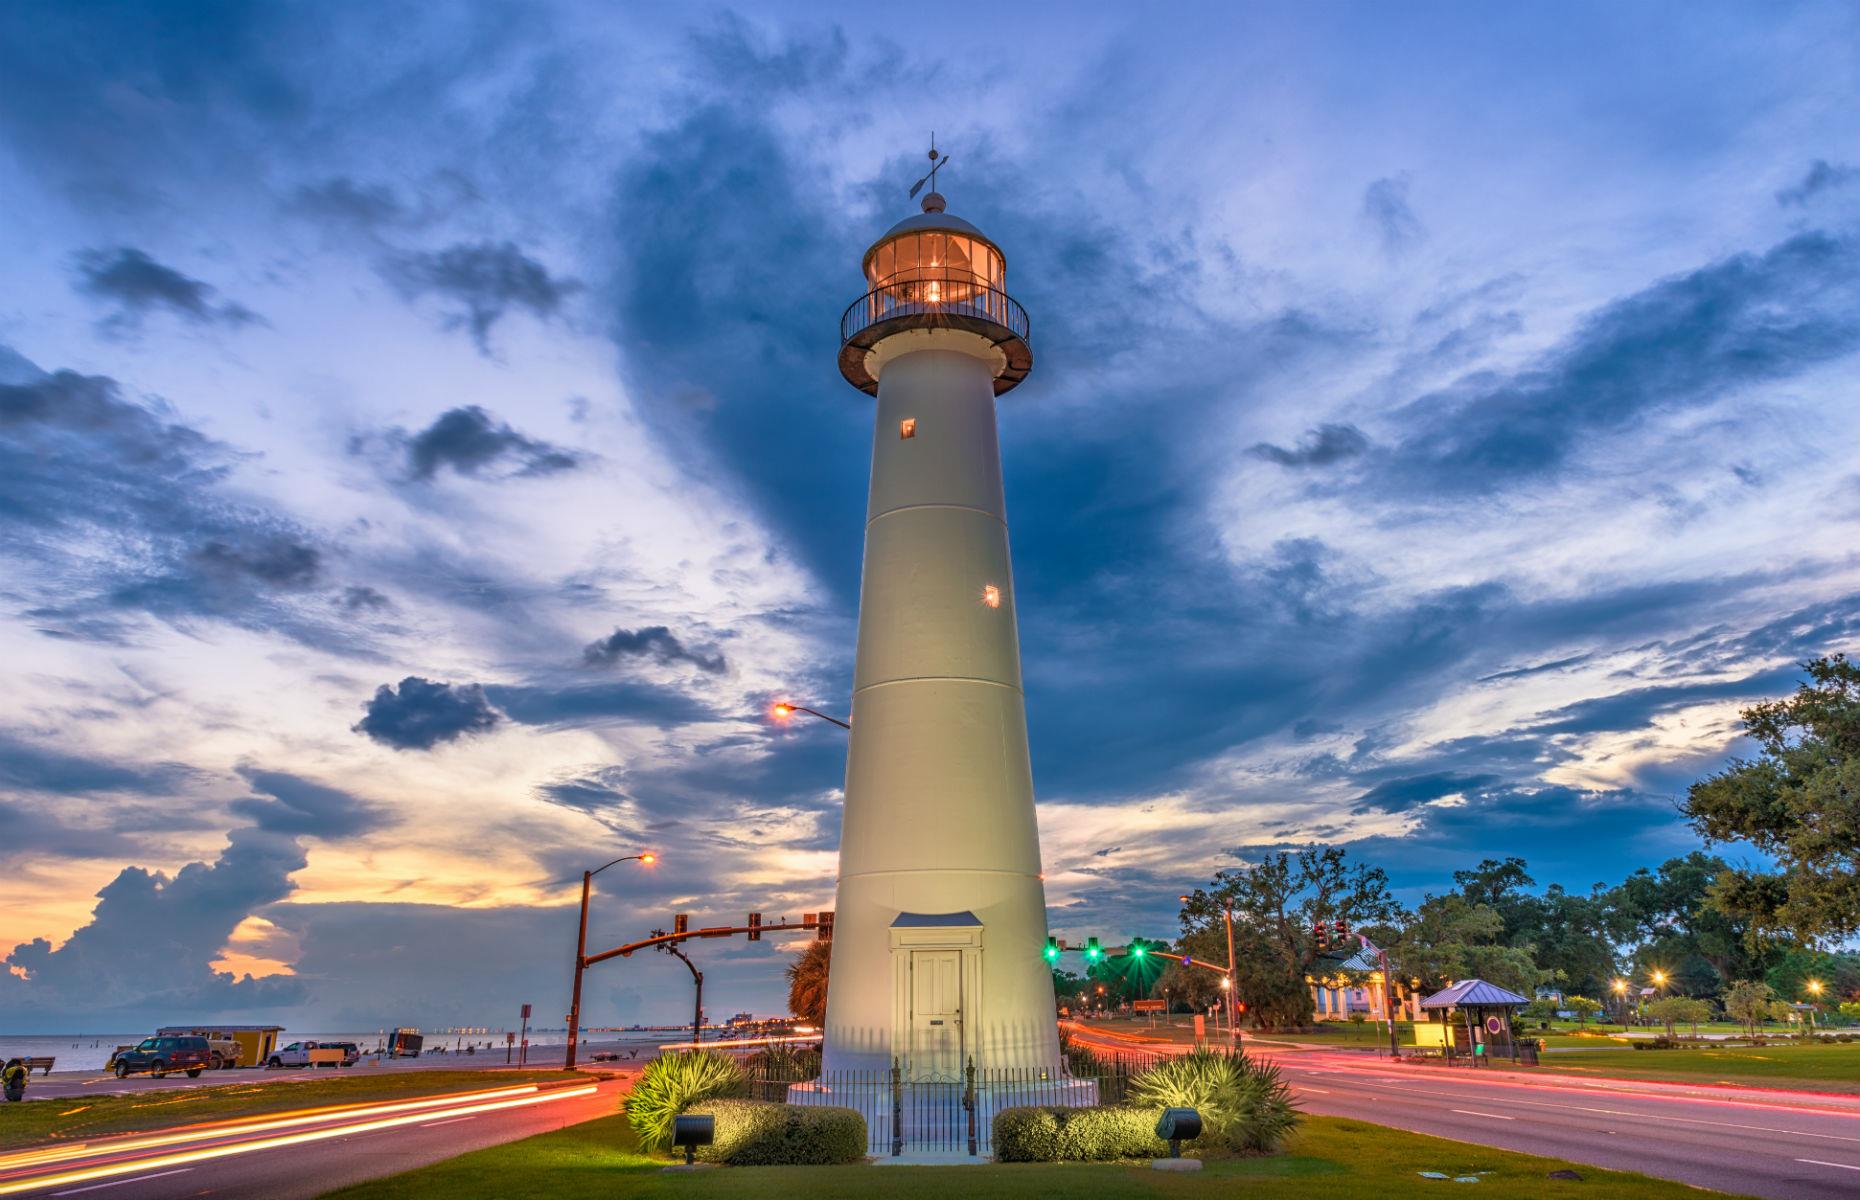 <p>Built in 1848, Biloxi was one of the first cast-iron lighthouses in the South. It’s also the only lighthouse in the country to be located in the middle of a major highway. Standing at 64 feet (19.5m) tall, the lighthouse was in service until 1939. The tower has been battered by, and survived, many storms including Hurricane Katrina in 2005 and has become a symbol of resilience for the residents of Biloxi. </p>